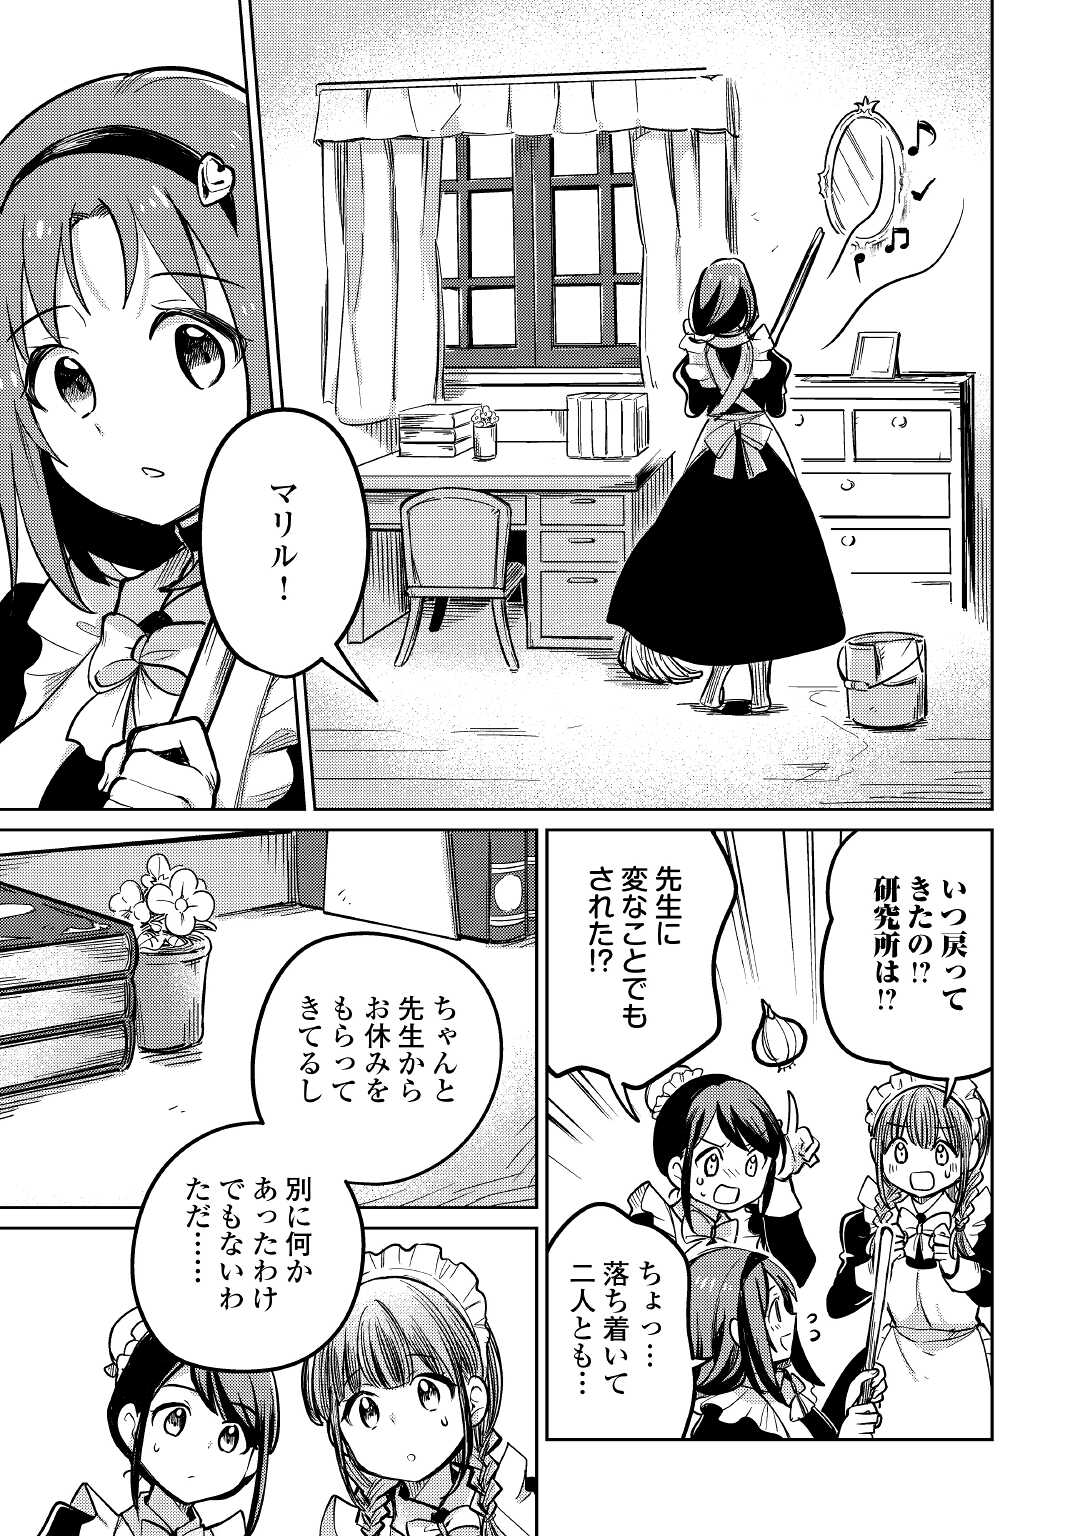 The Former Structural Researcher’s Story of Otherworldly Adventure 第40話 - Page 31